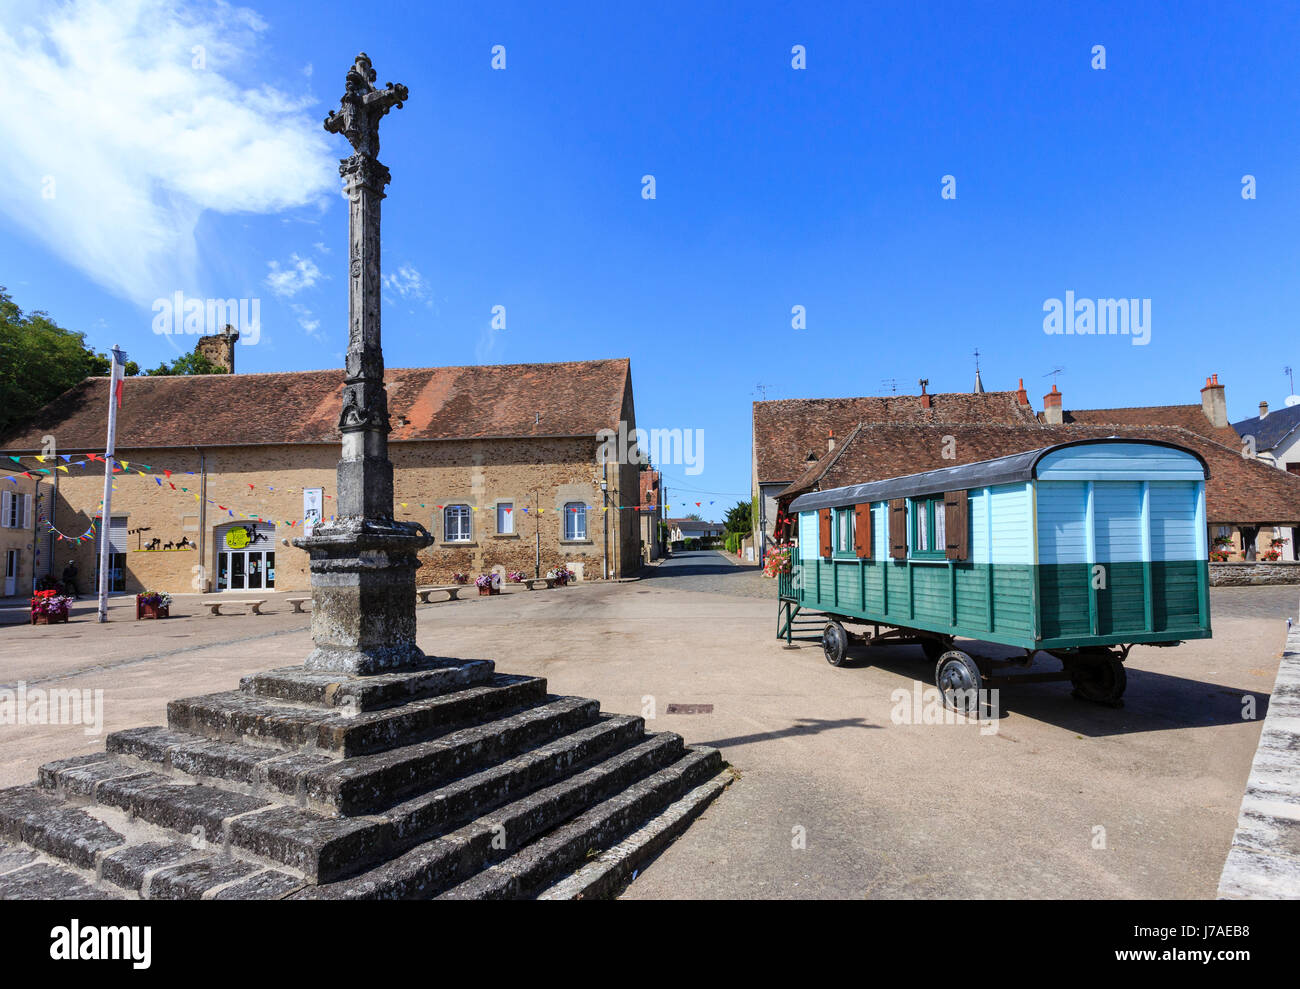 France, Indre, Sainte Severe sur Indre, Marche square, calvary and elements evoking the movie Jour de Fete (the Big Day) by Jacques Tati Stock Photo